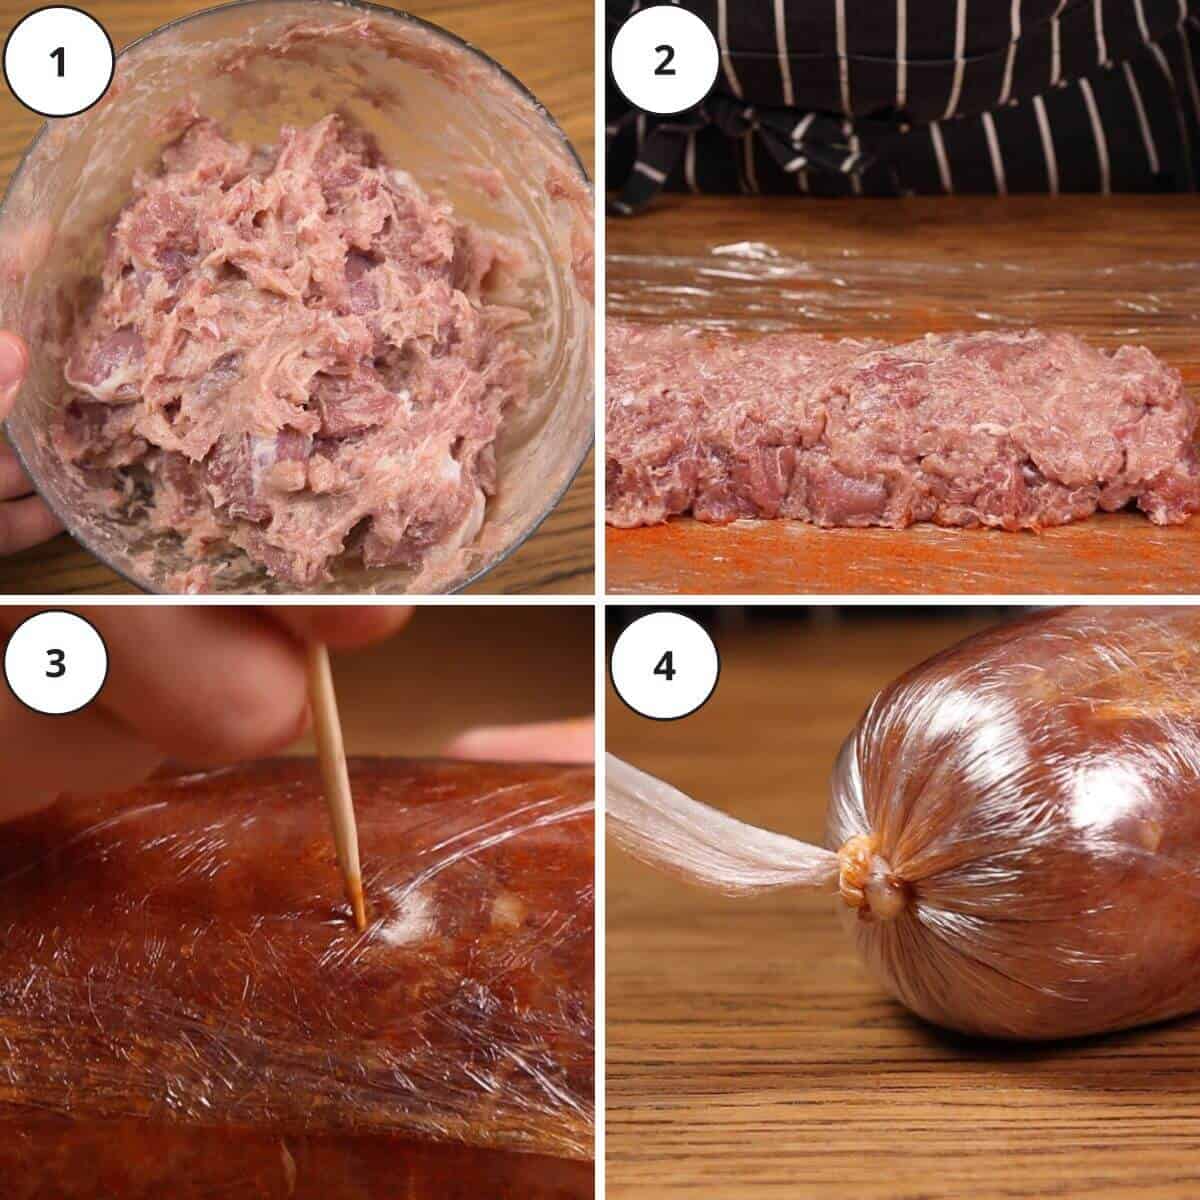 Picture steps for making turkey deli meat.